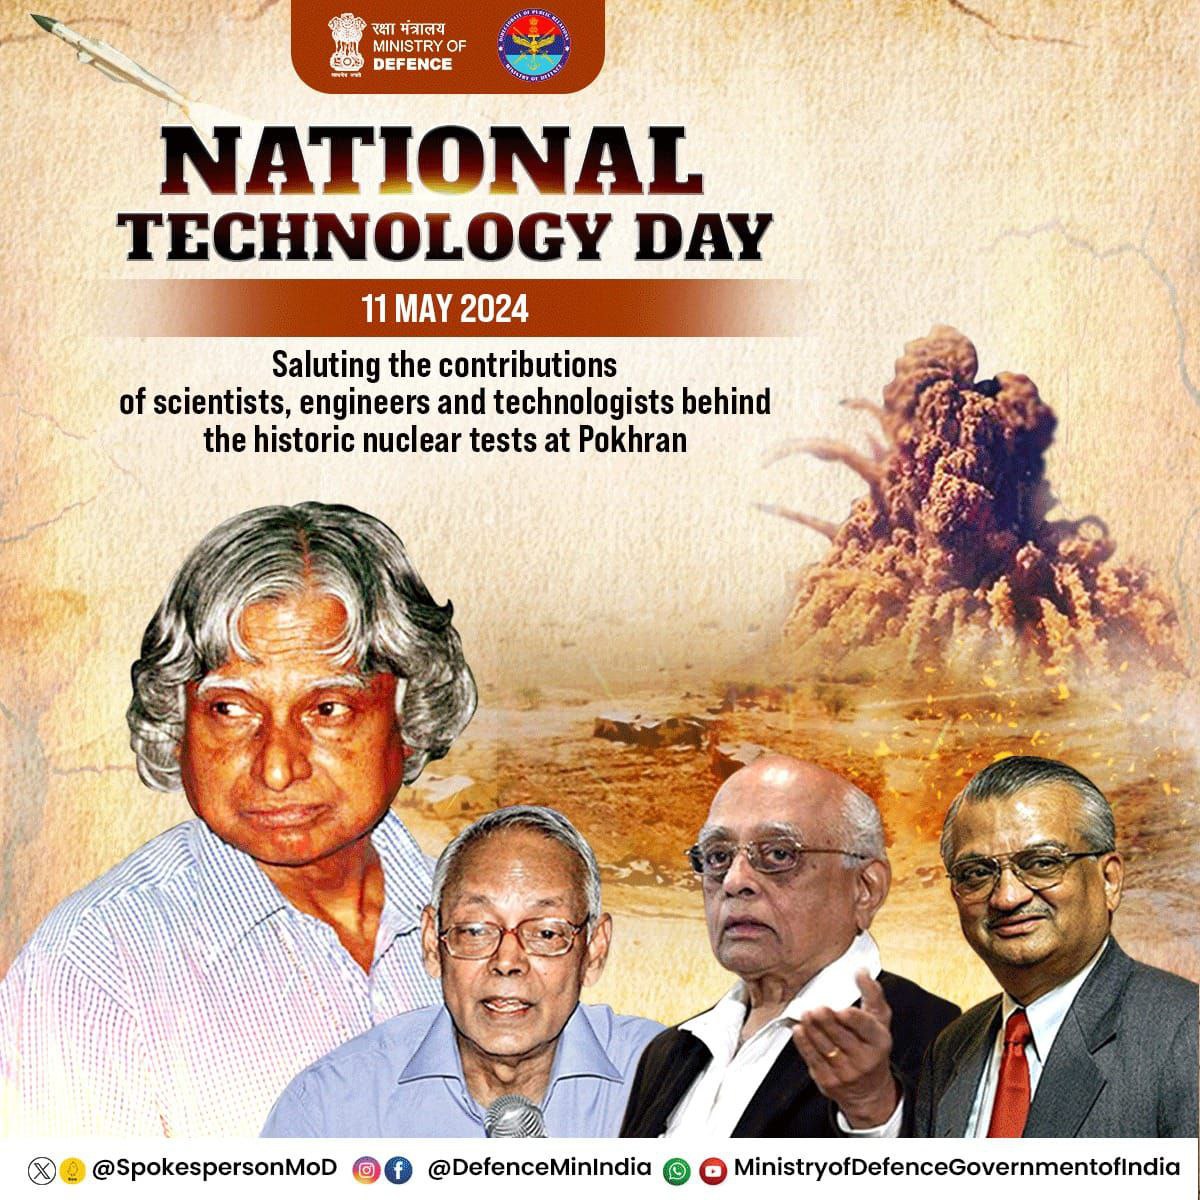 #NationalTechnologyDay,#ModiKiGurantee 11 May 1998 Pokhran. Salute to our great technology leaders. Wishing more breakthroughs & achievements on National Technology Day 🙏